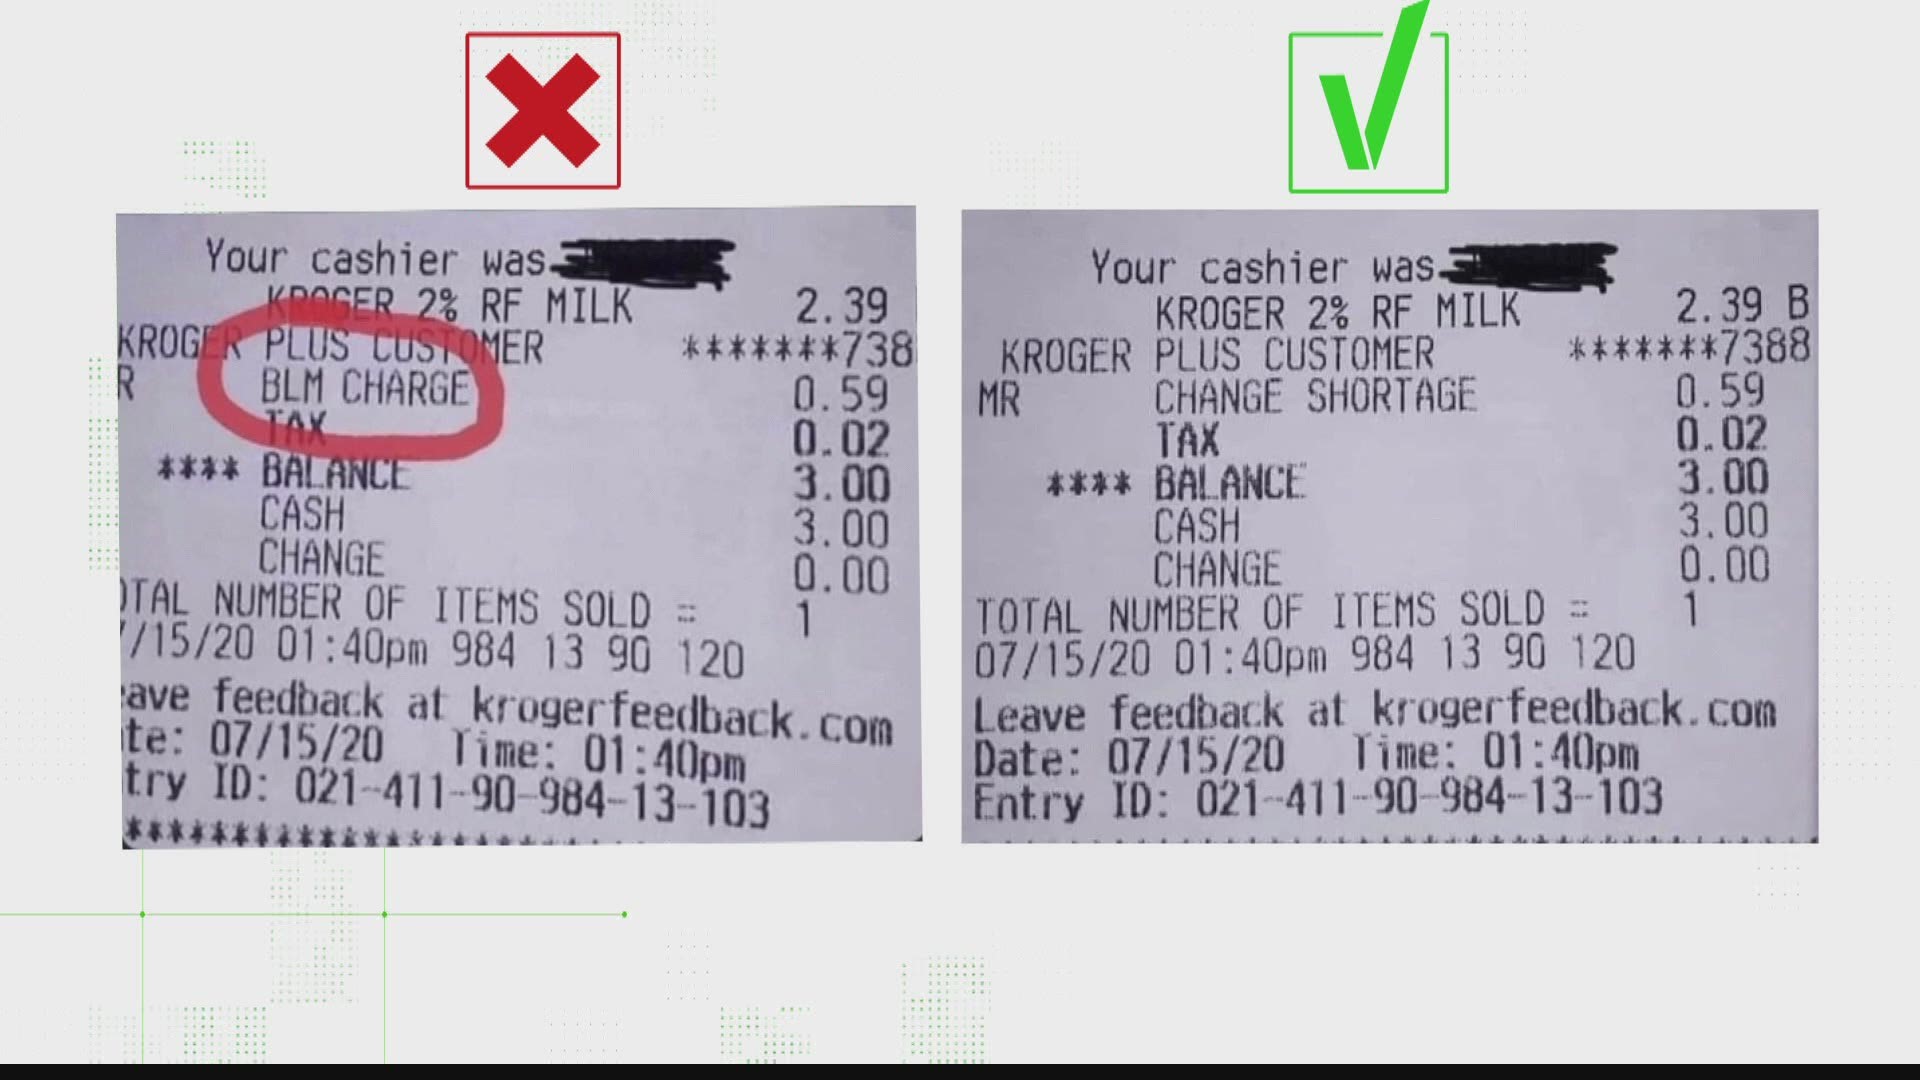 Our VERIFY team checked with Kroger and an image showing a receipt with a "BLM Charge" is fake.